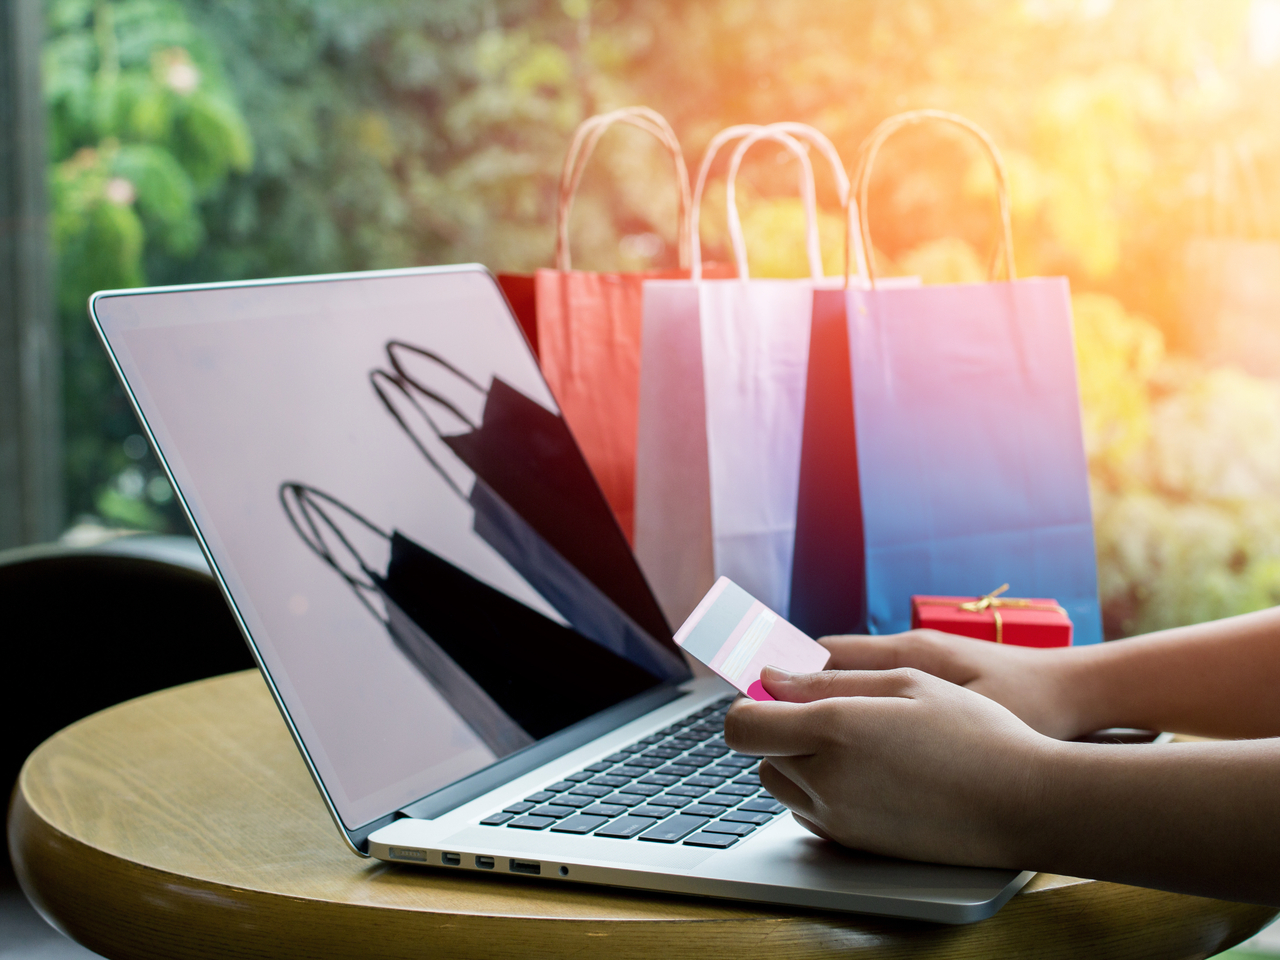 A person holding a credit card and shopping online on a laptop with shopping bags in the background.